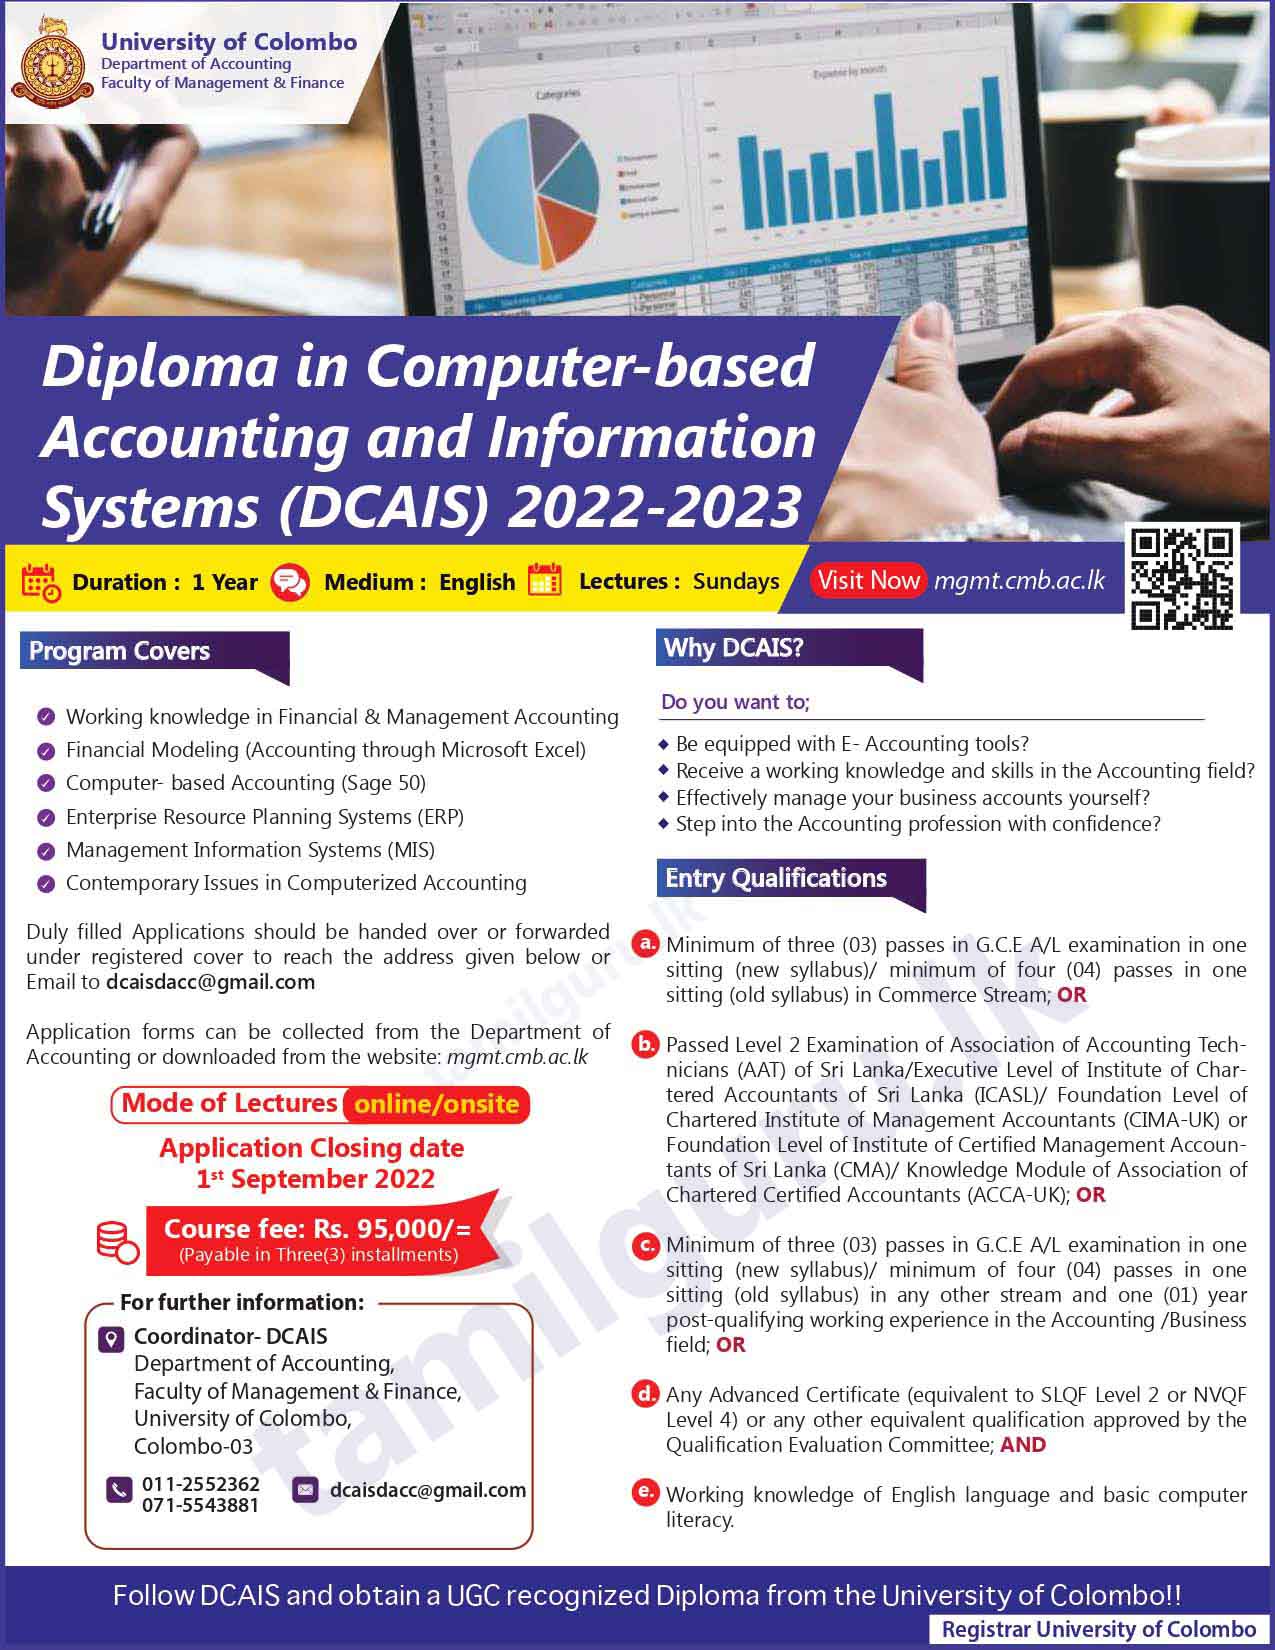 Diploma in Computer-based Accounting and Information Systems (DCAIS) 2022/2023 - University of Colombo